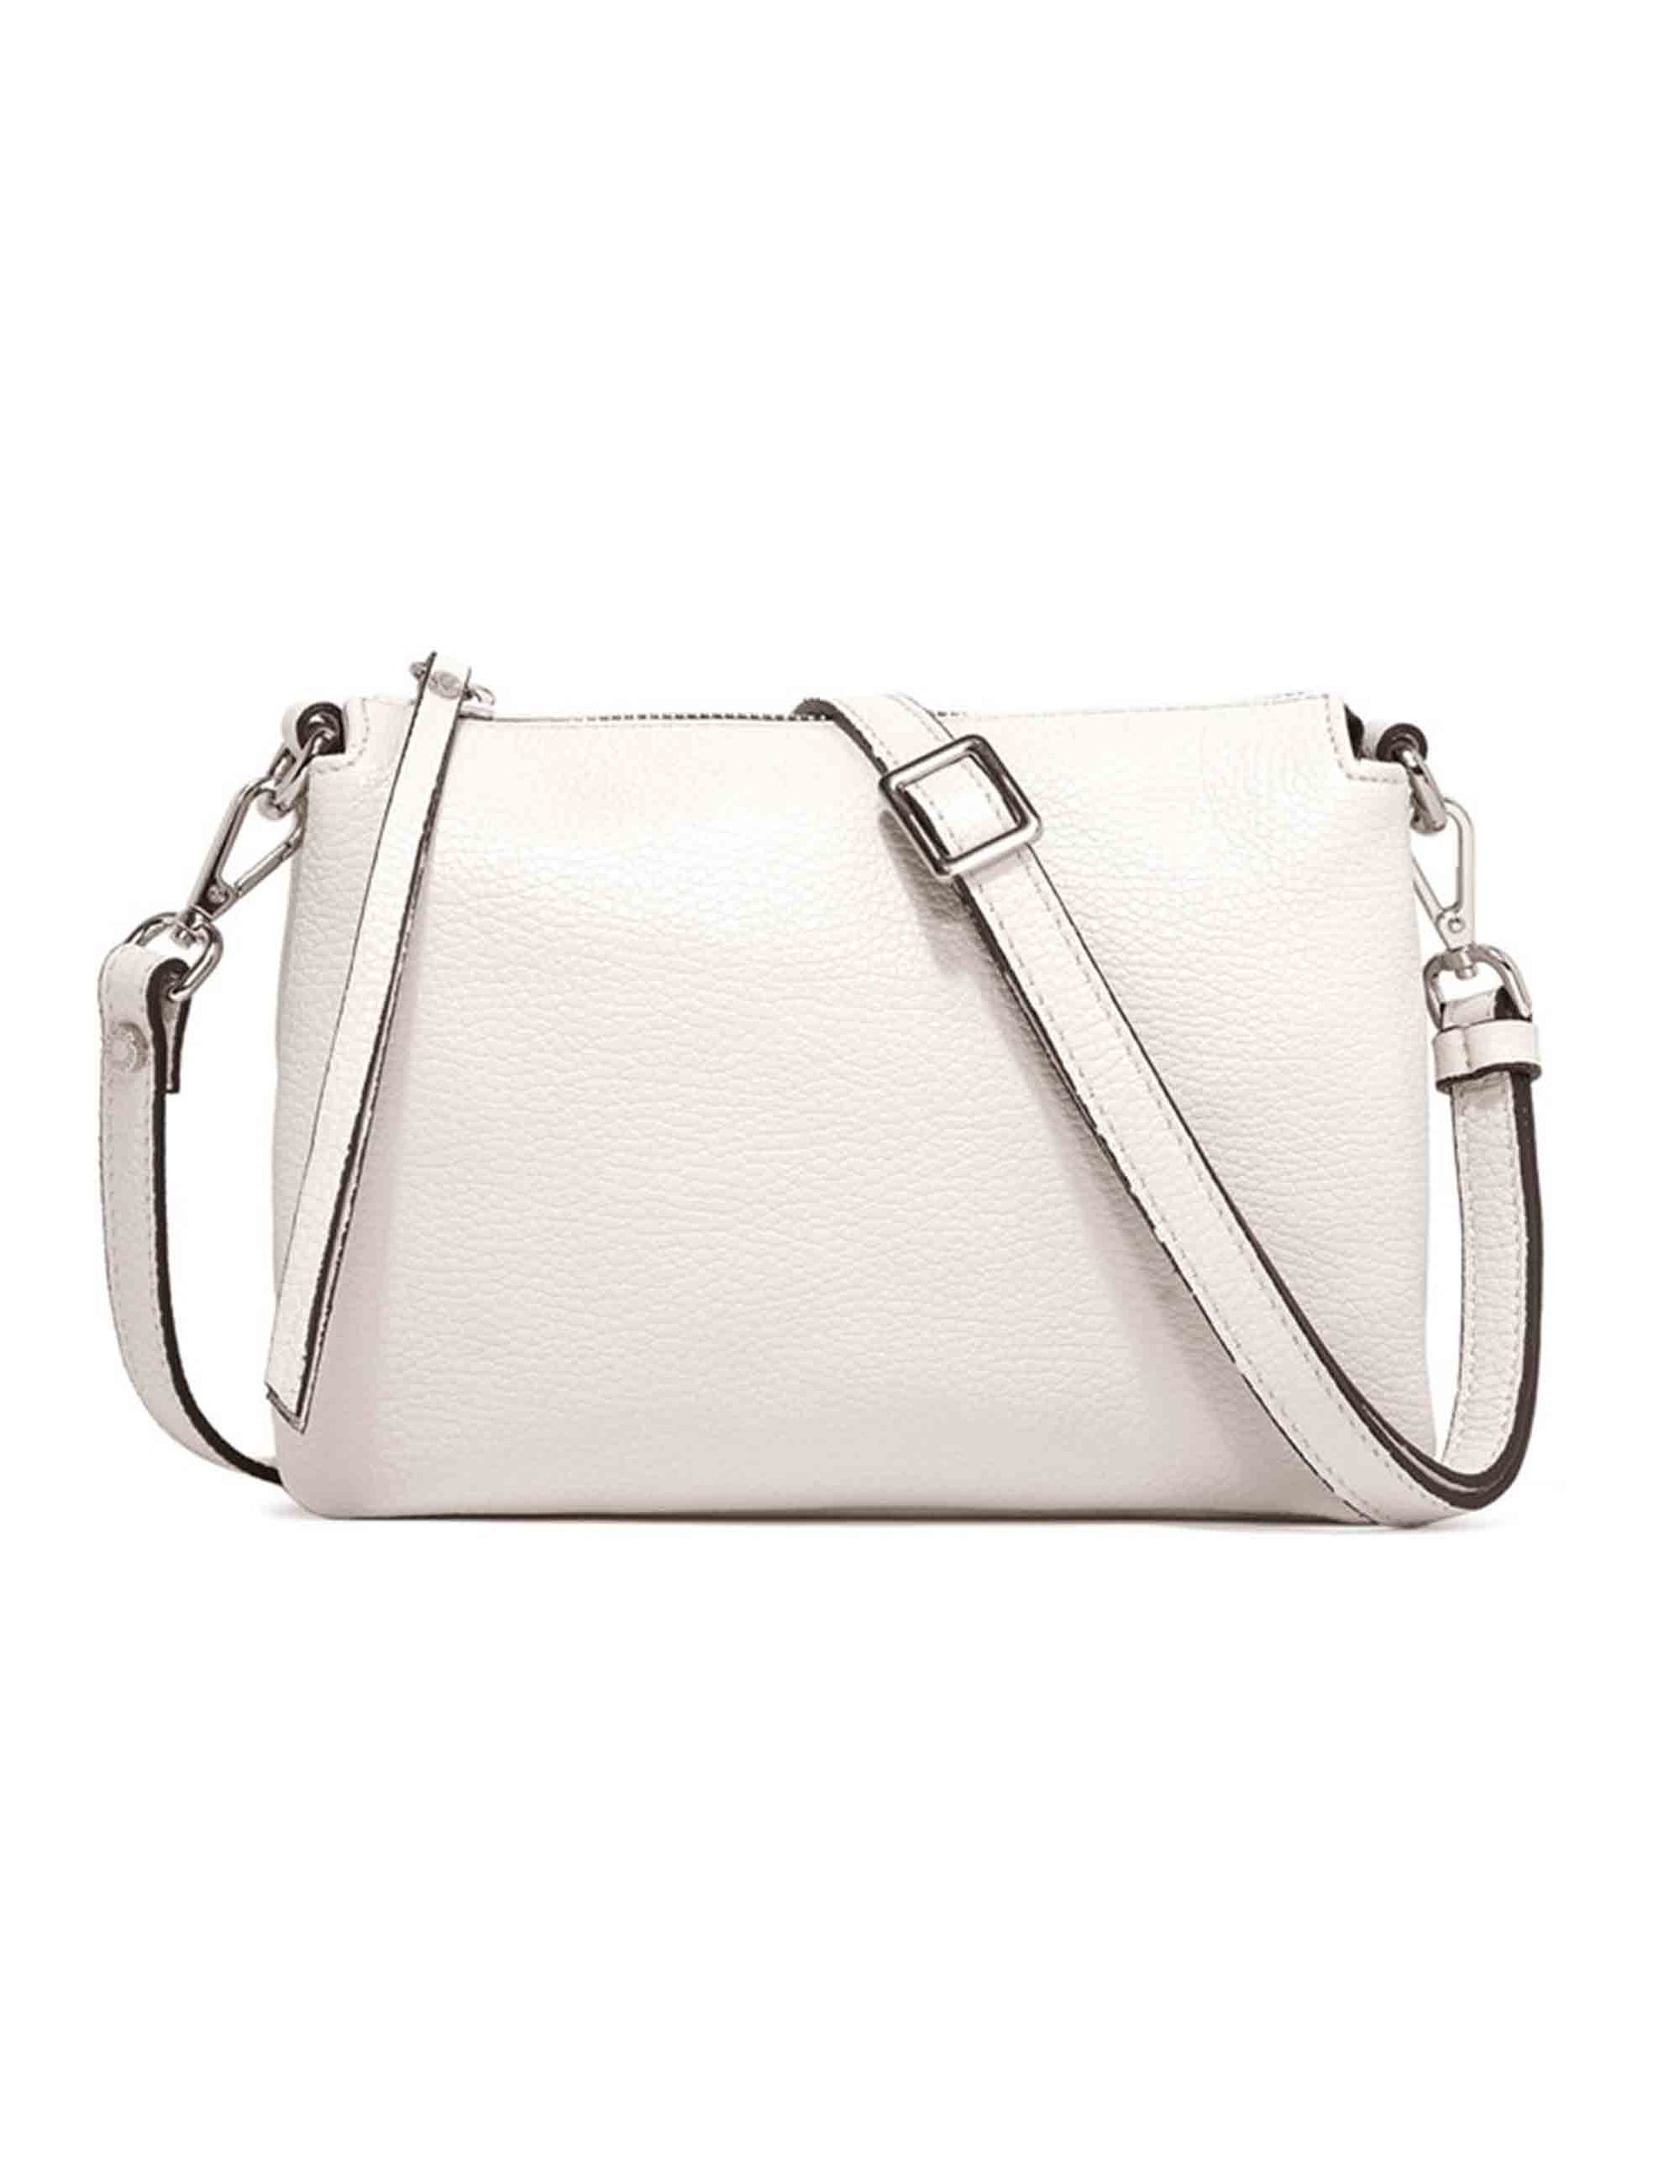 Three women's clutch bags in cream leather with matching removable shoulder strap